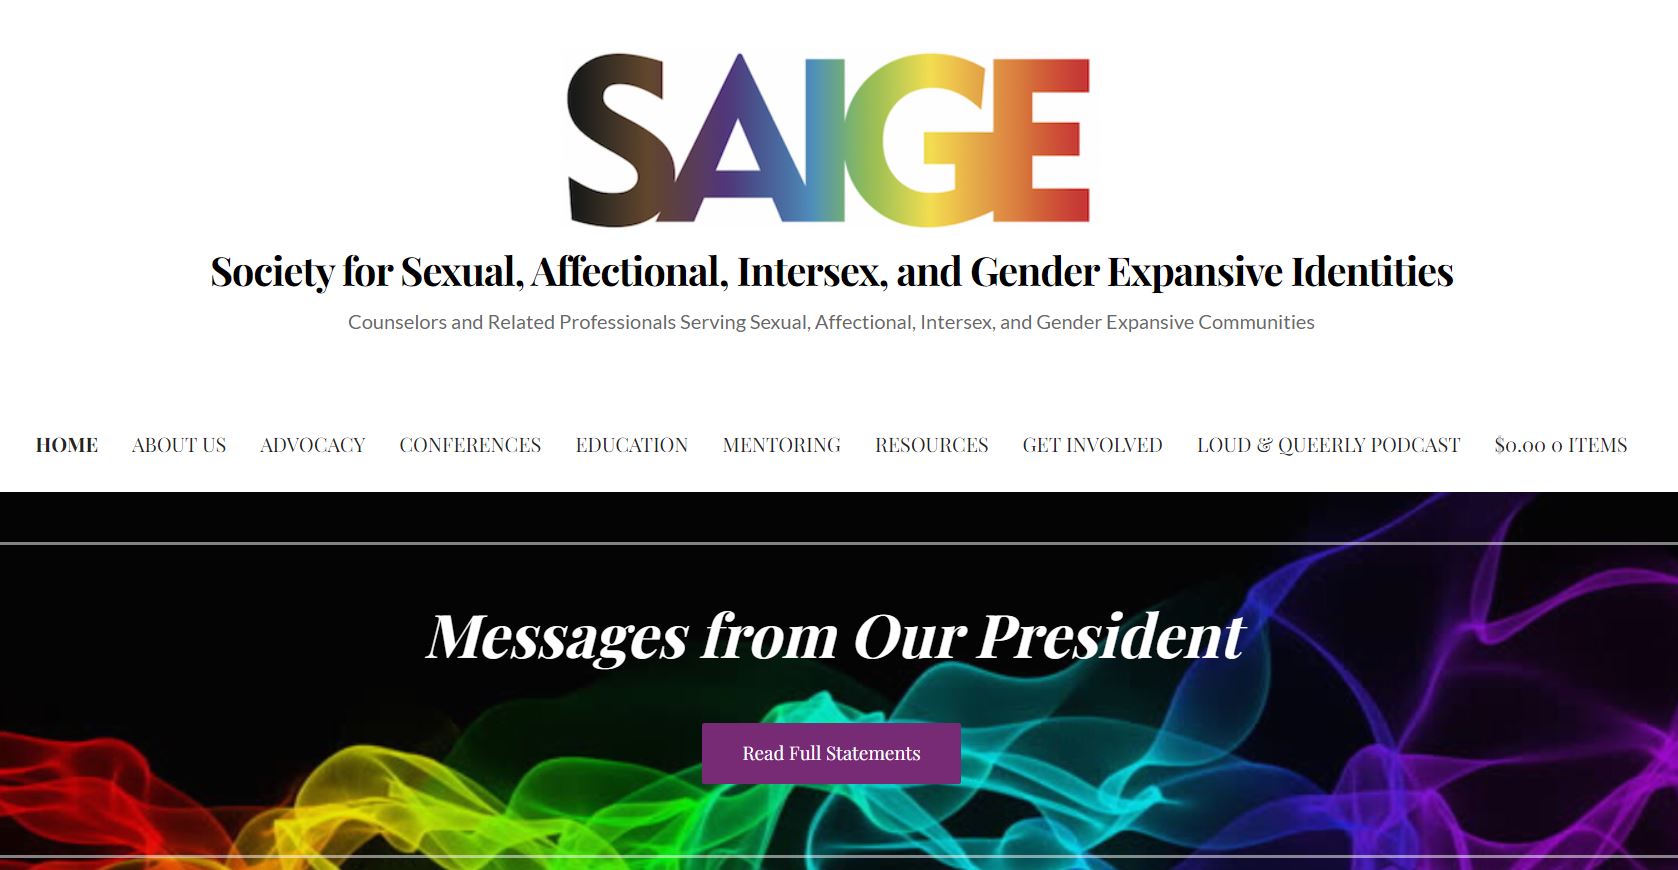 Society for Sexual, Affectional, Intersex, and Gender Expansive Identities (SAIGE)